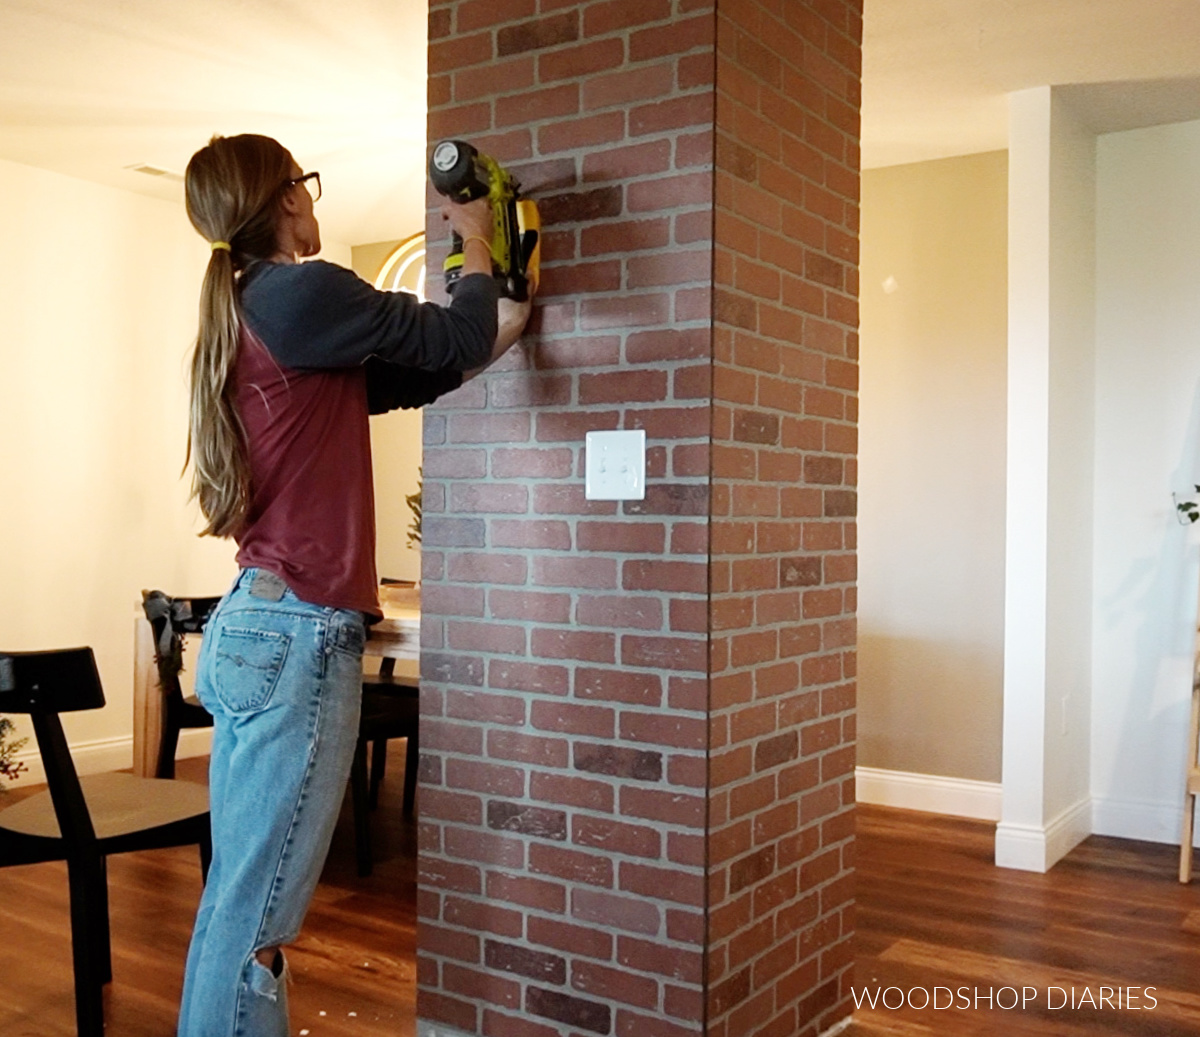 Shara Woodshop Diaries using stud finder to nail brick paneling in place on outside of column